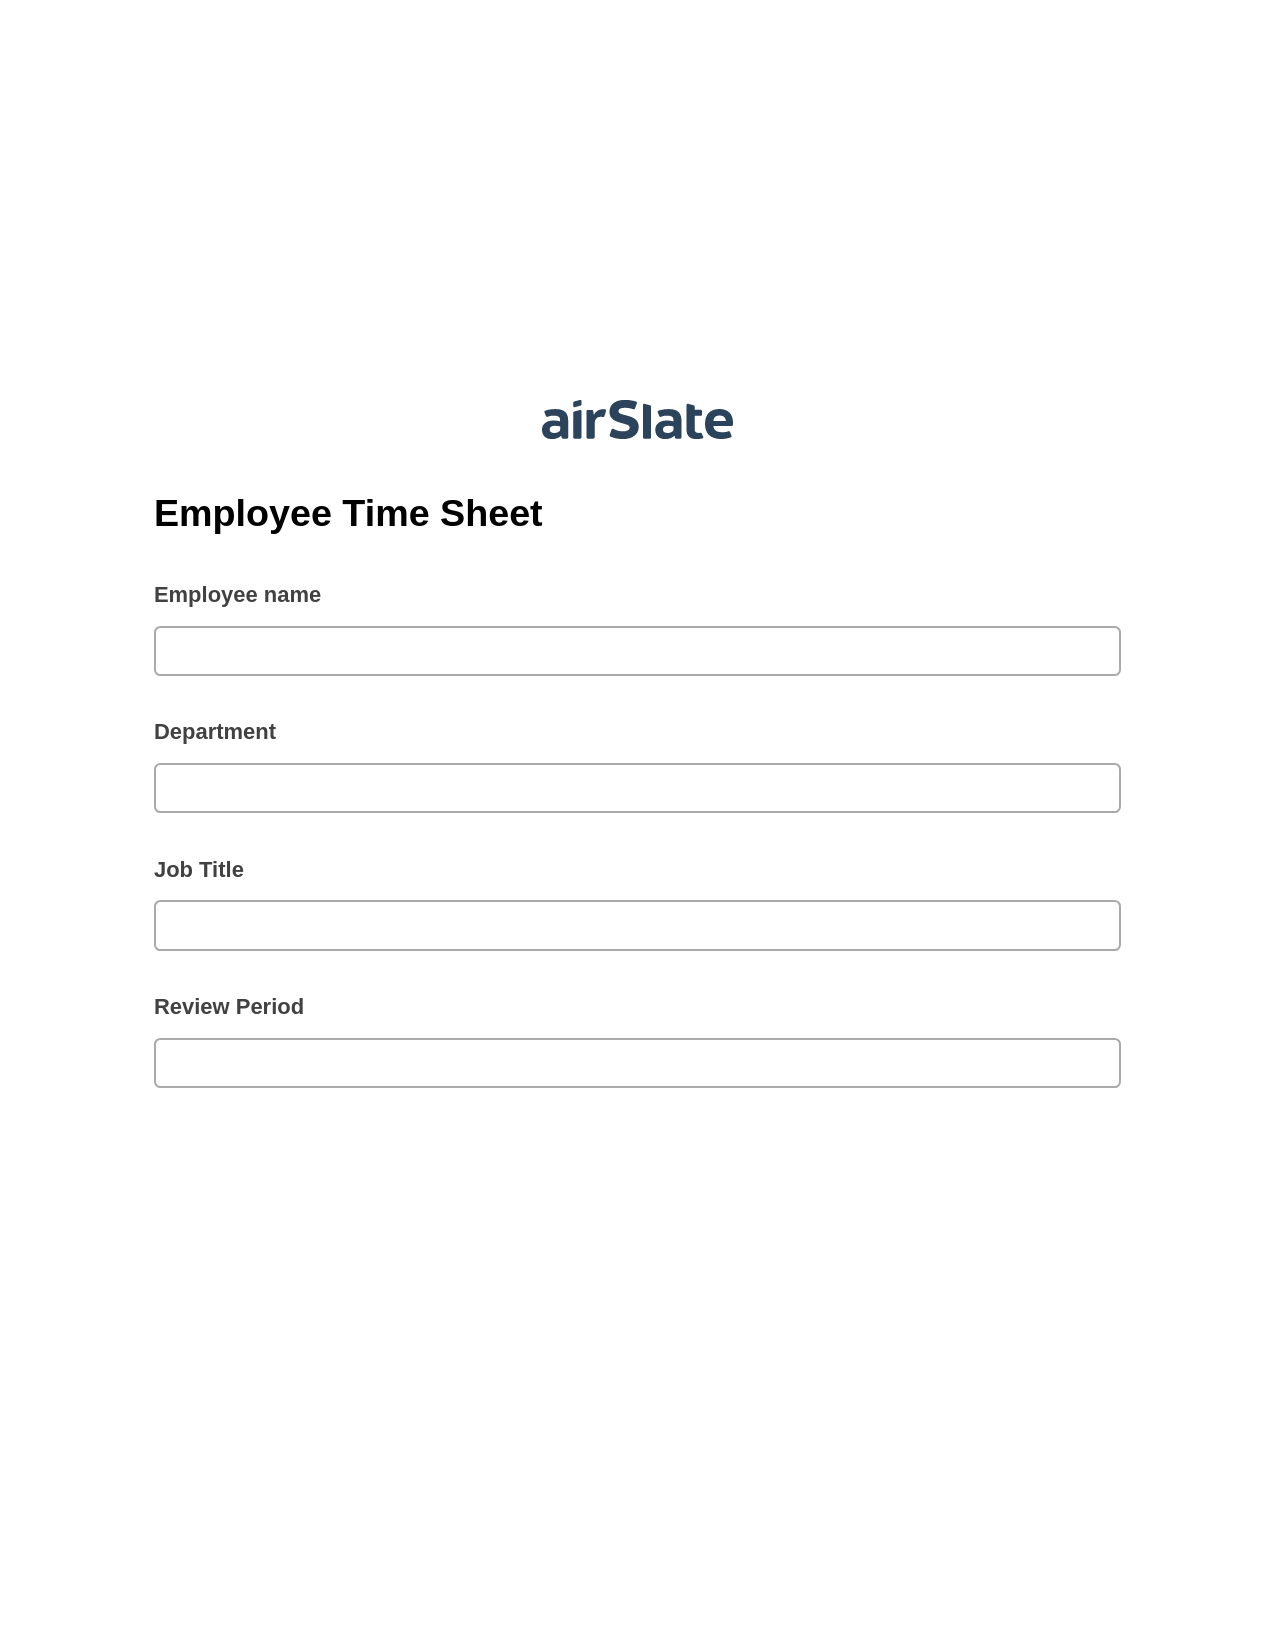 Multirole Employee Time Sheet Pre-fill from Salesforce Records Bot, Create Salesforce Records Bot, Export to Smartsheet